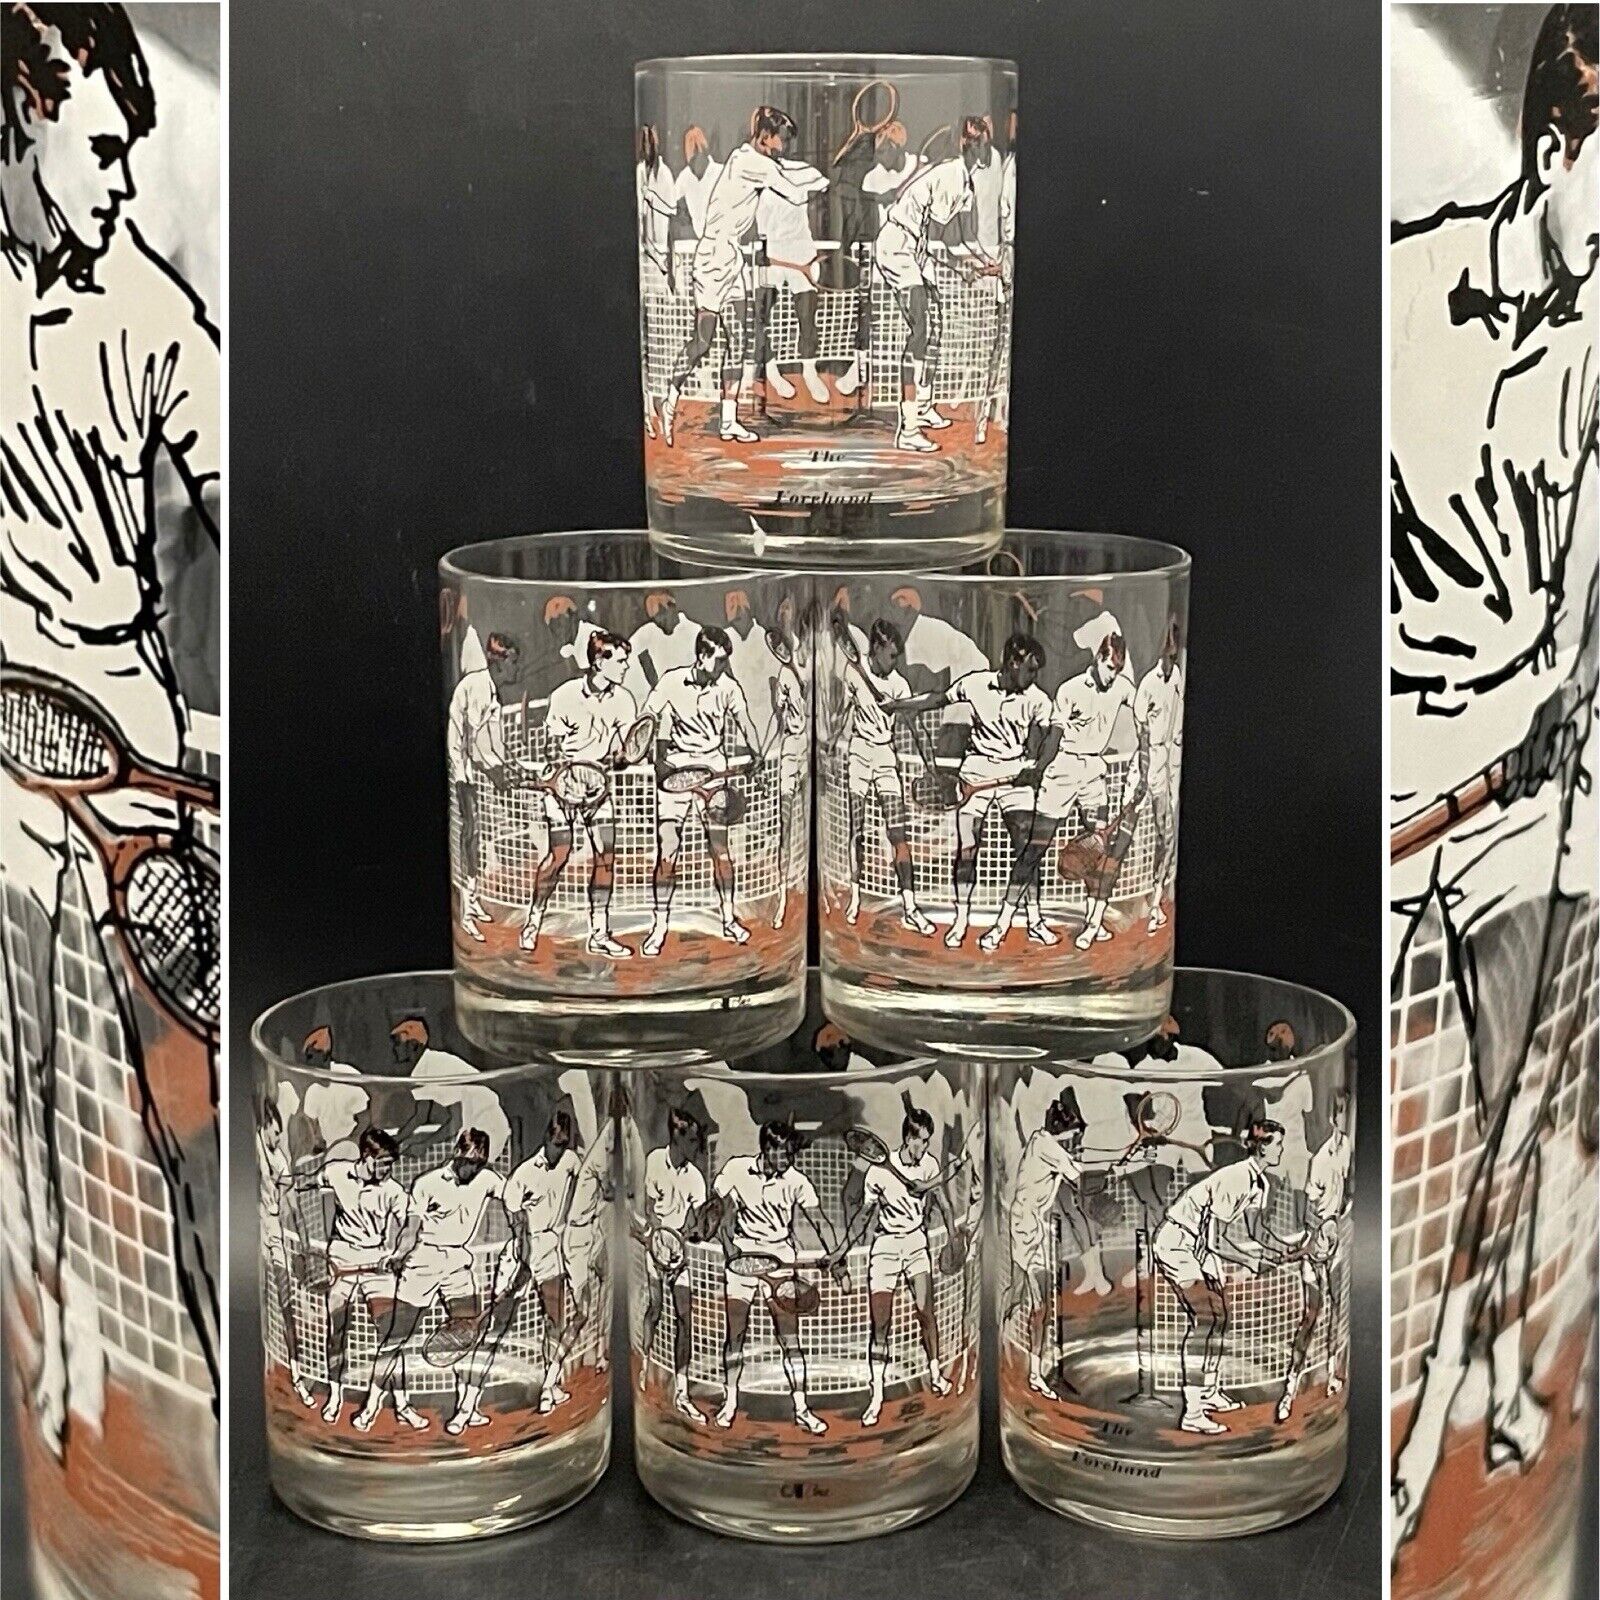 Cera Barware The Forehand Lowball Whiskey Glasses 6ps Set c1960s USA 4.25